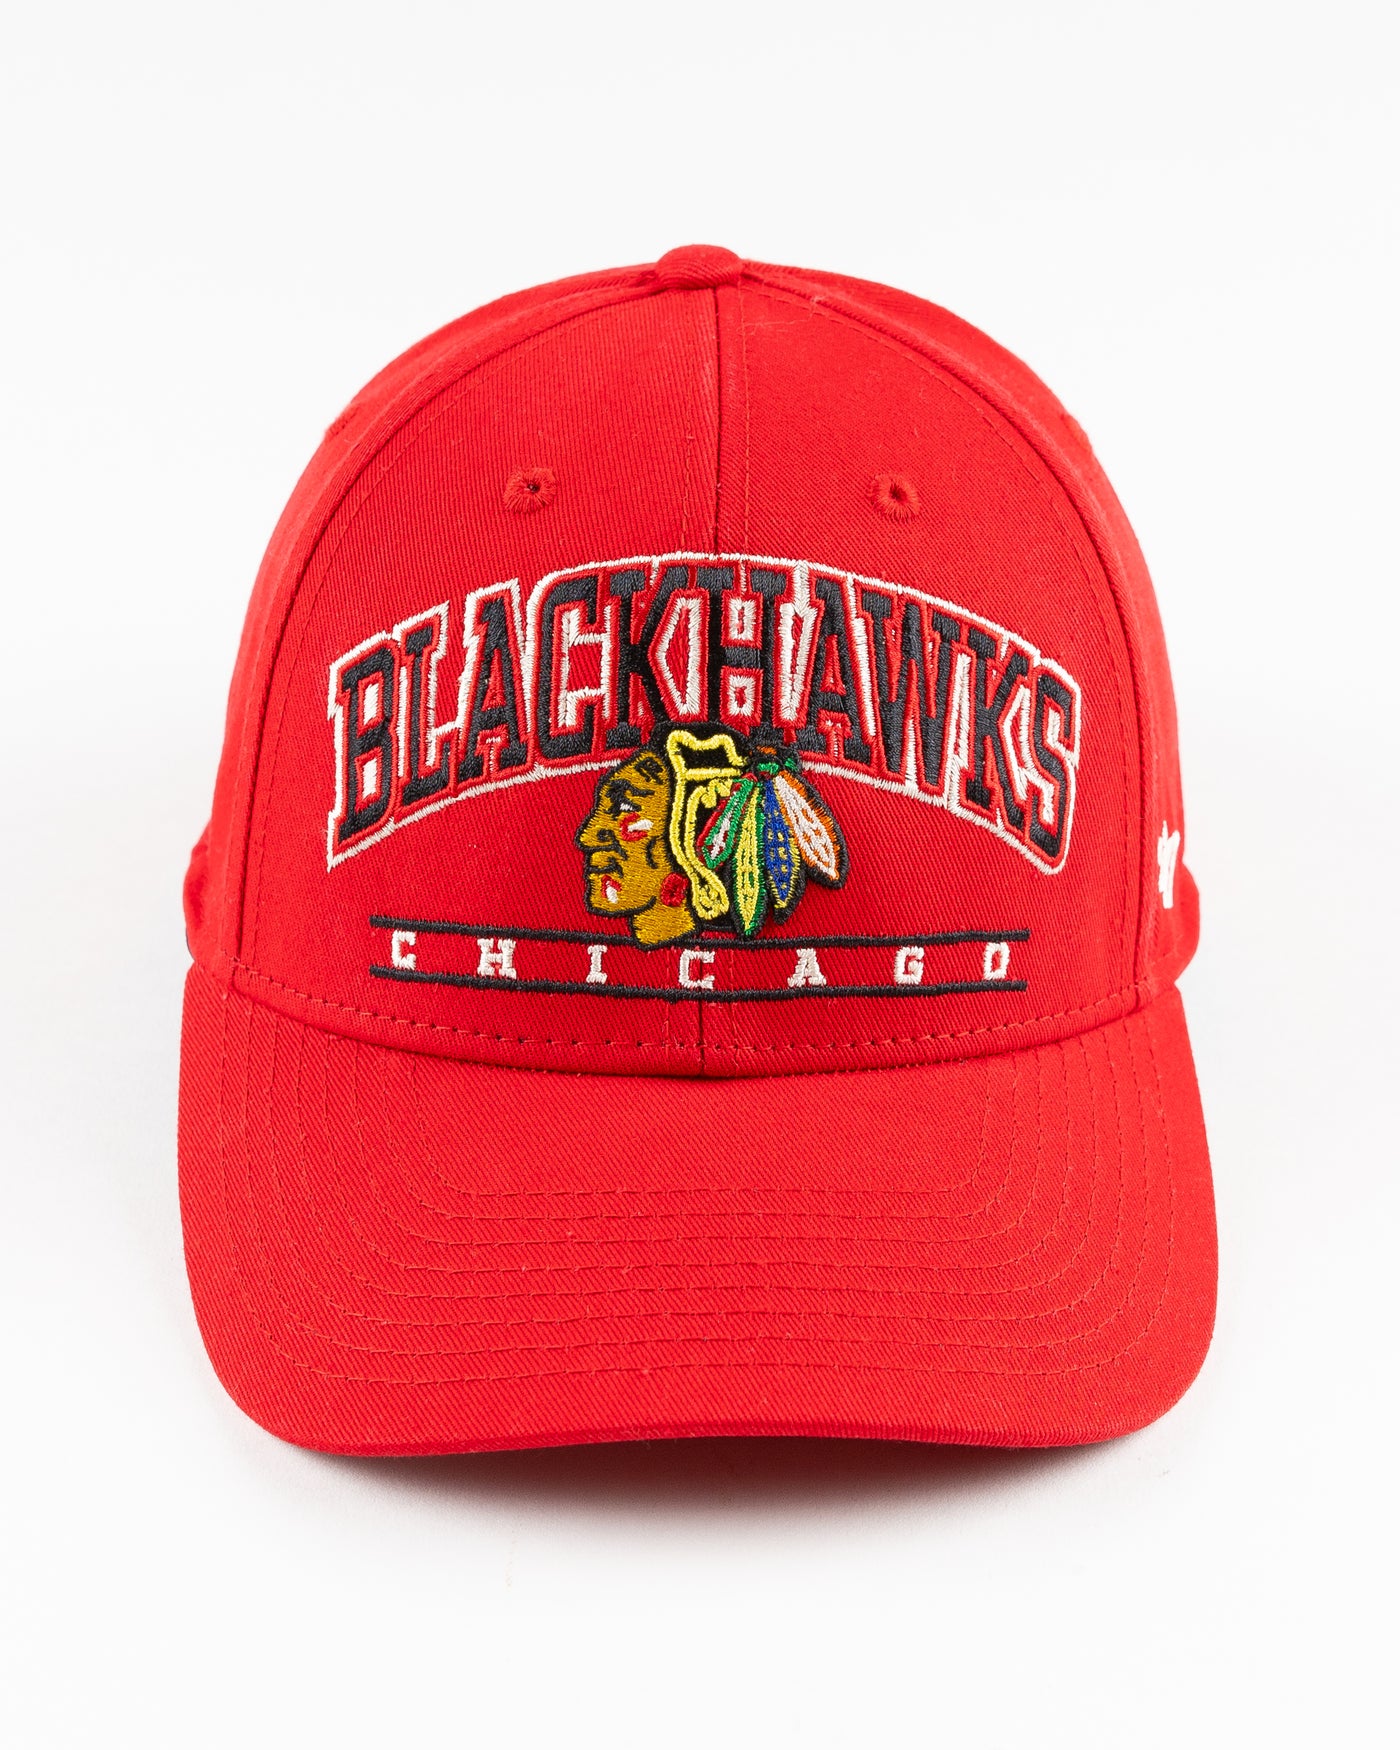 red '47 brand baseball cap with Chicago Blackhawks graphic embroidered on front - front lay flat